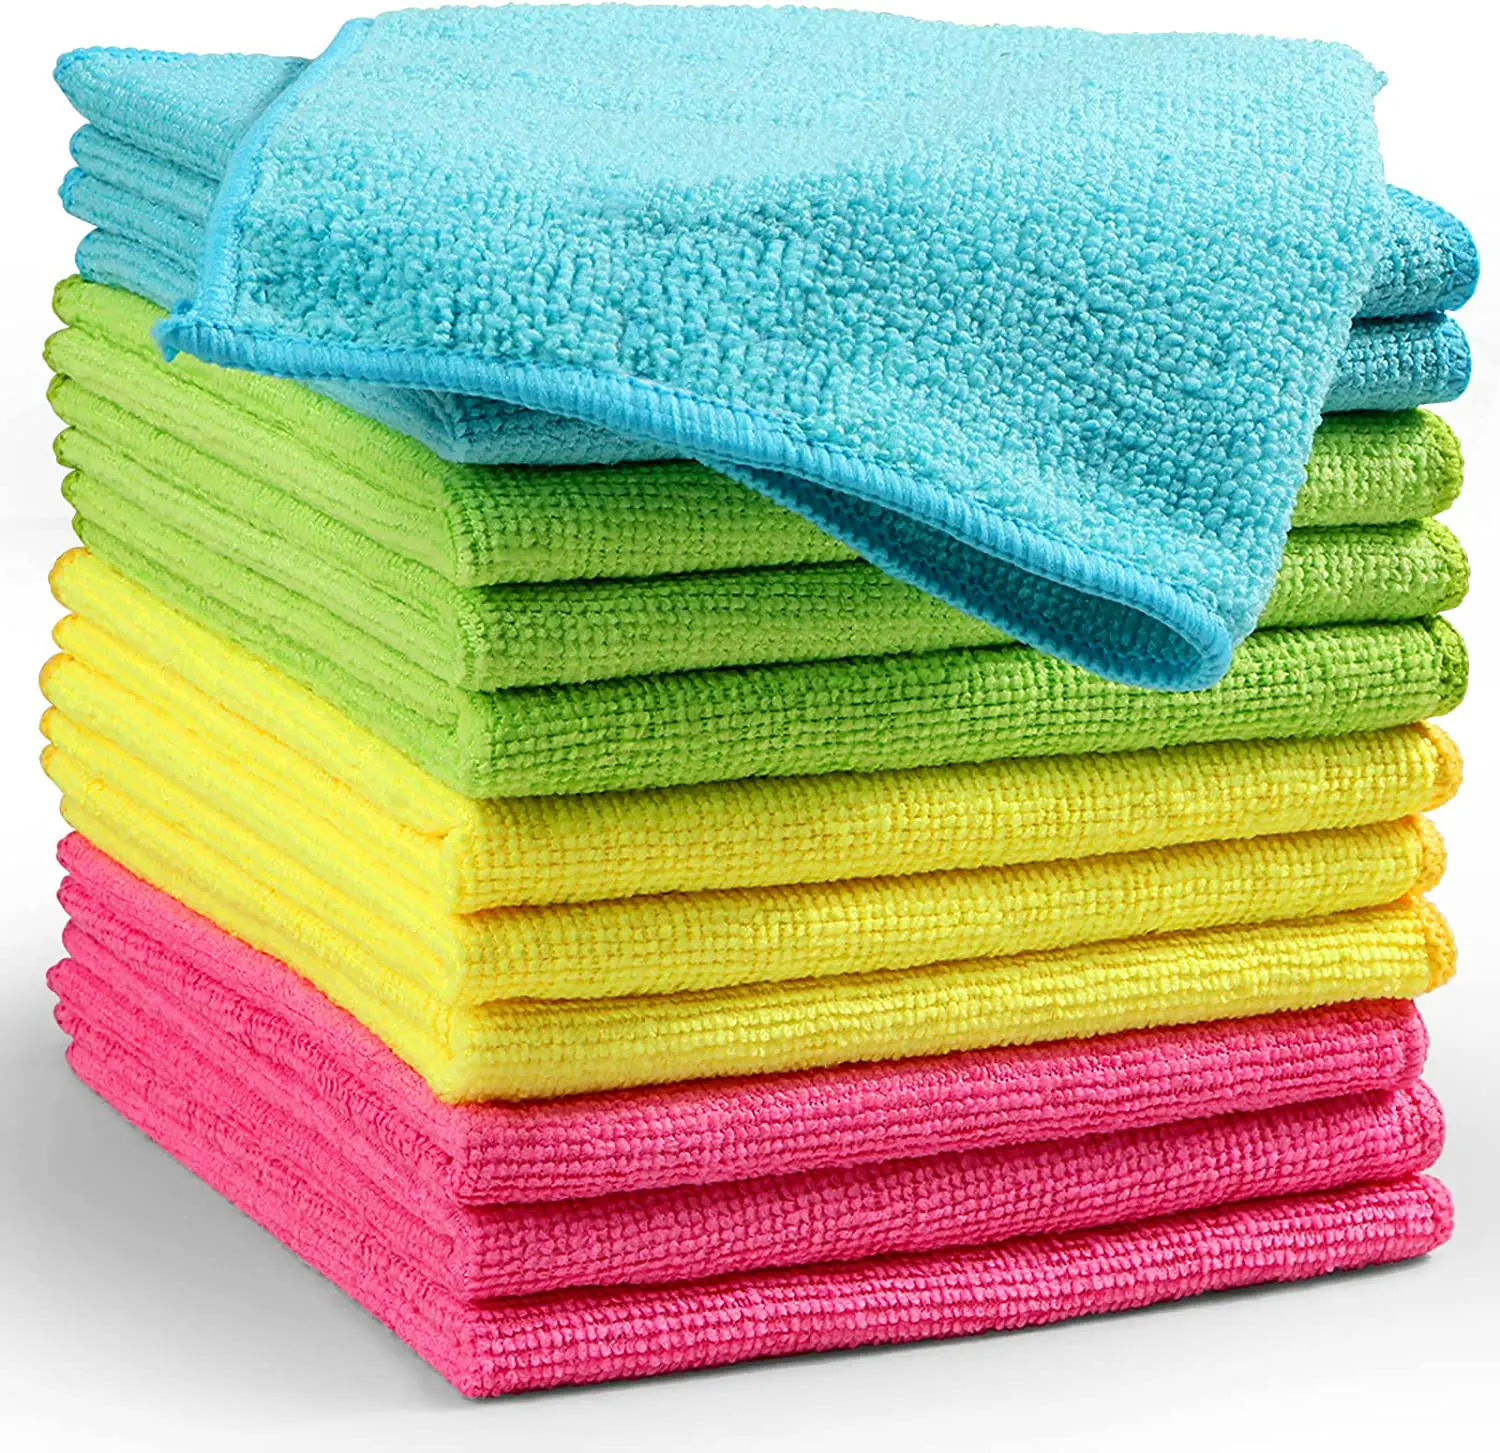 80% Polyester 20% Polyamide Microfiber Towel Car Wash Towel Kitchen Dish Cleaning Cloth Kitchen Cleaning Towels